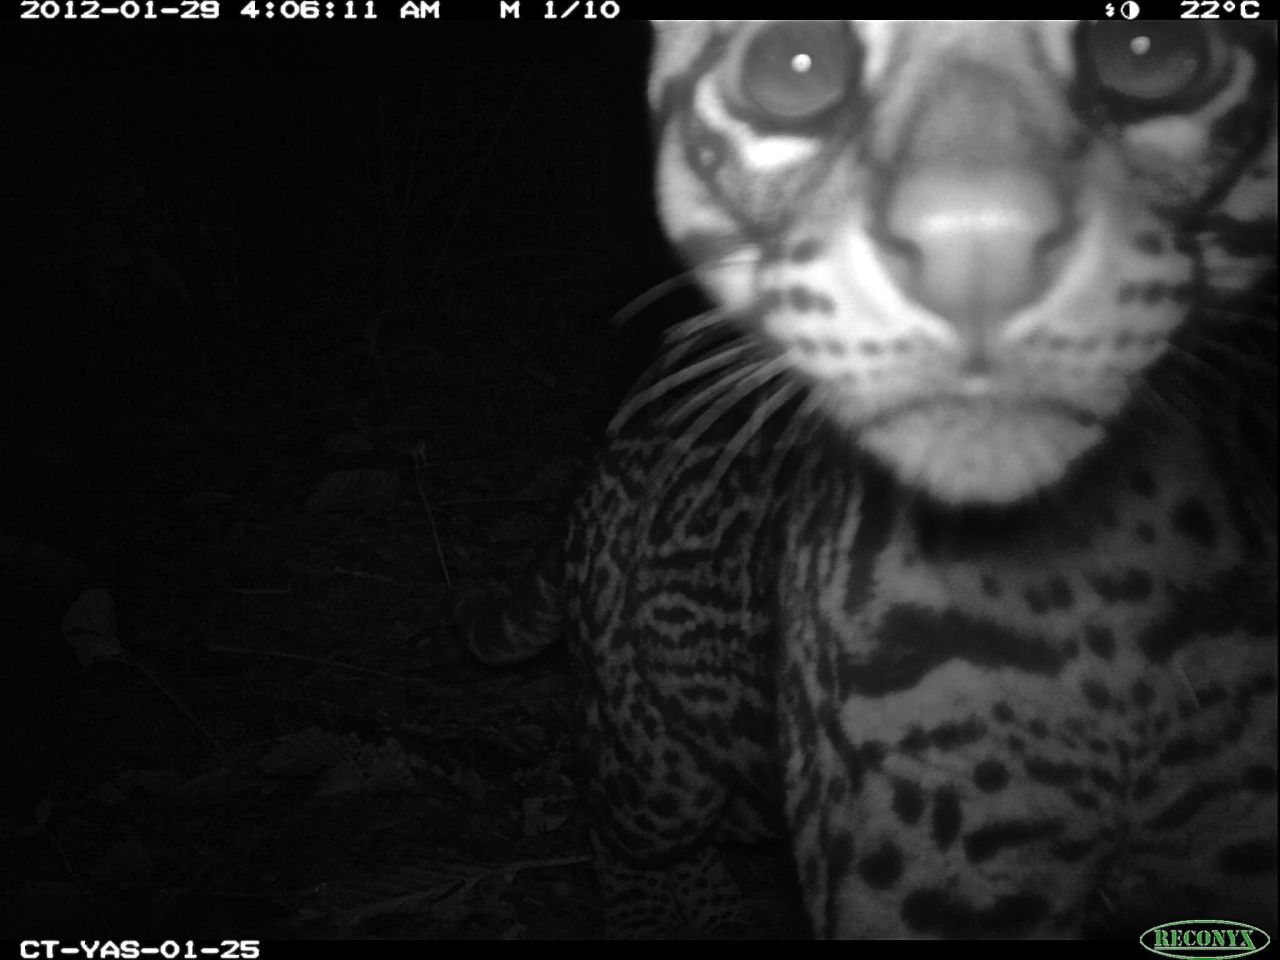 A curious ocelot getting up close to a camera trap.